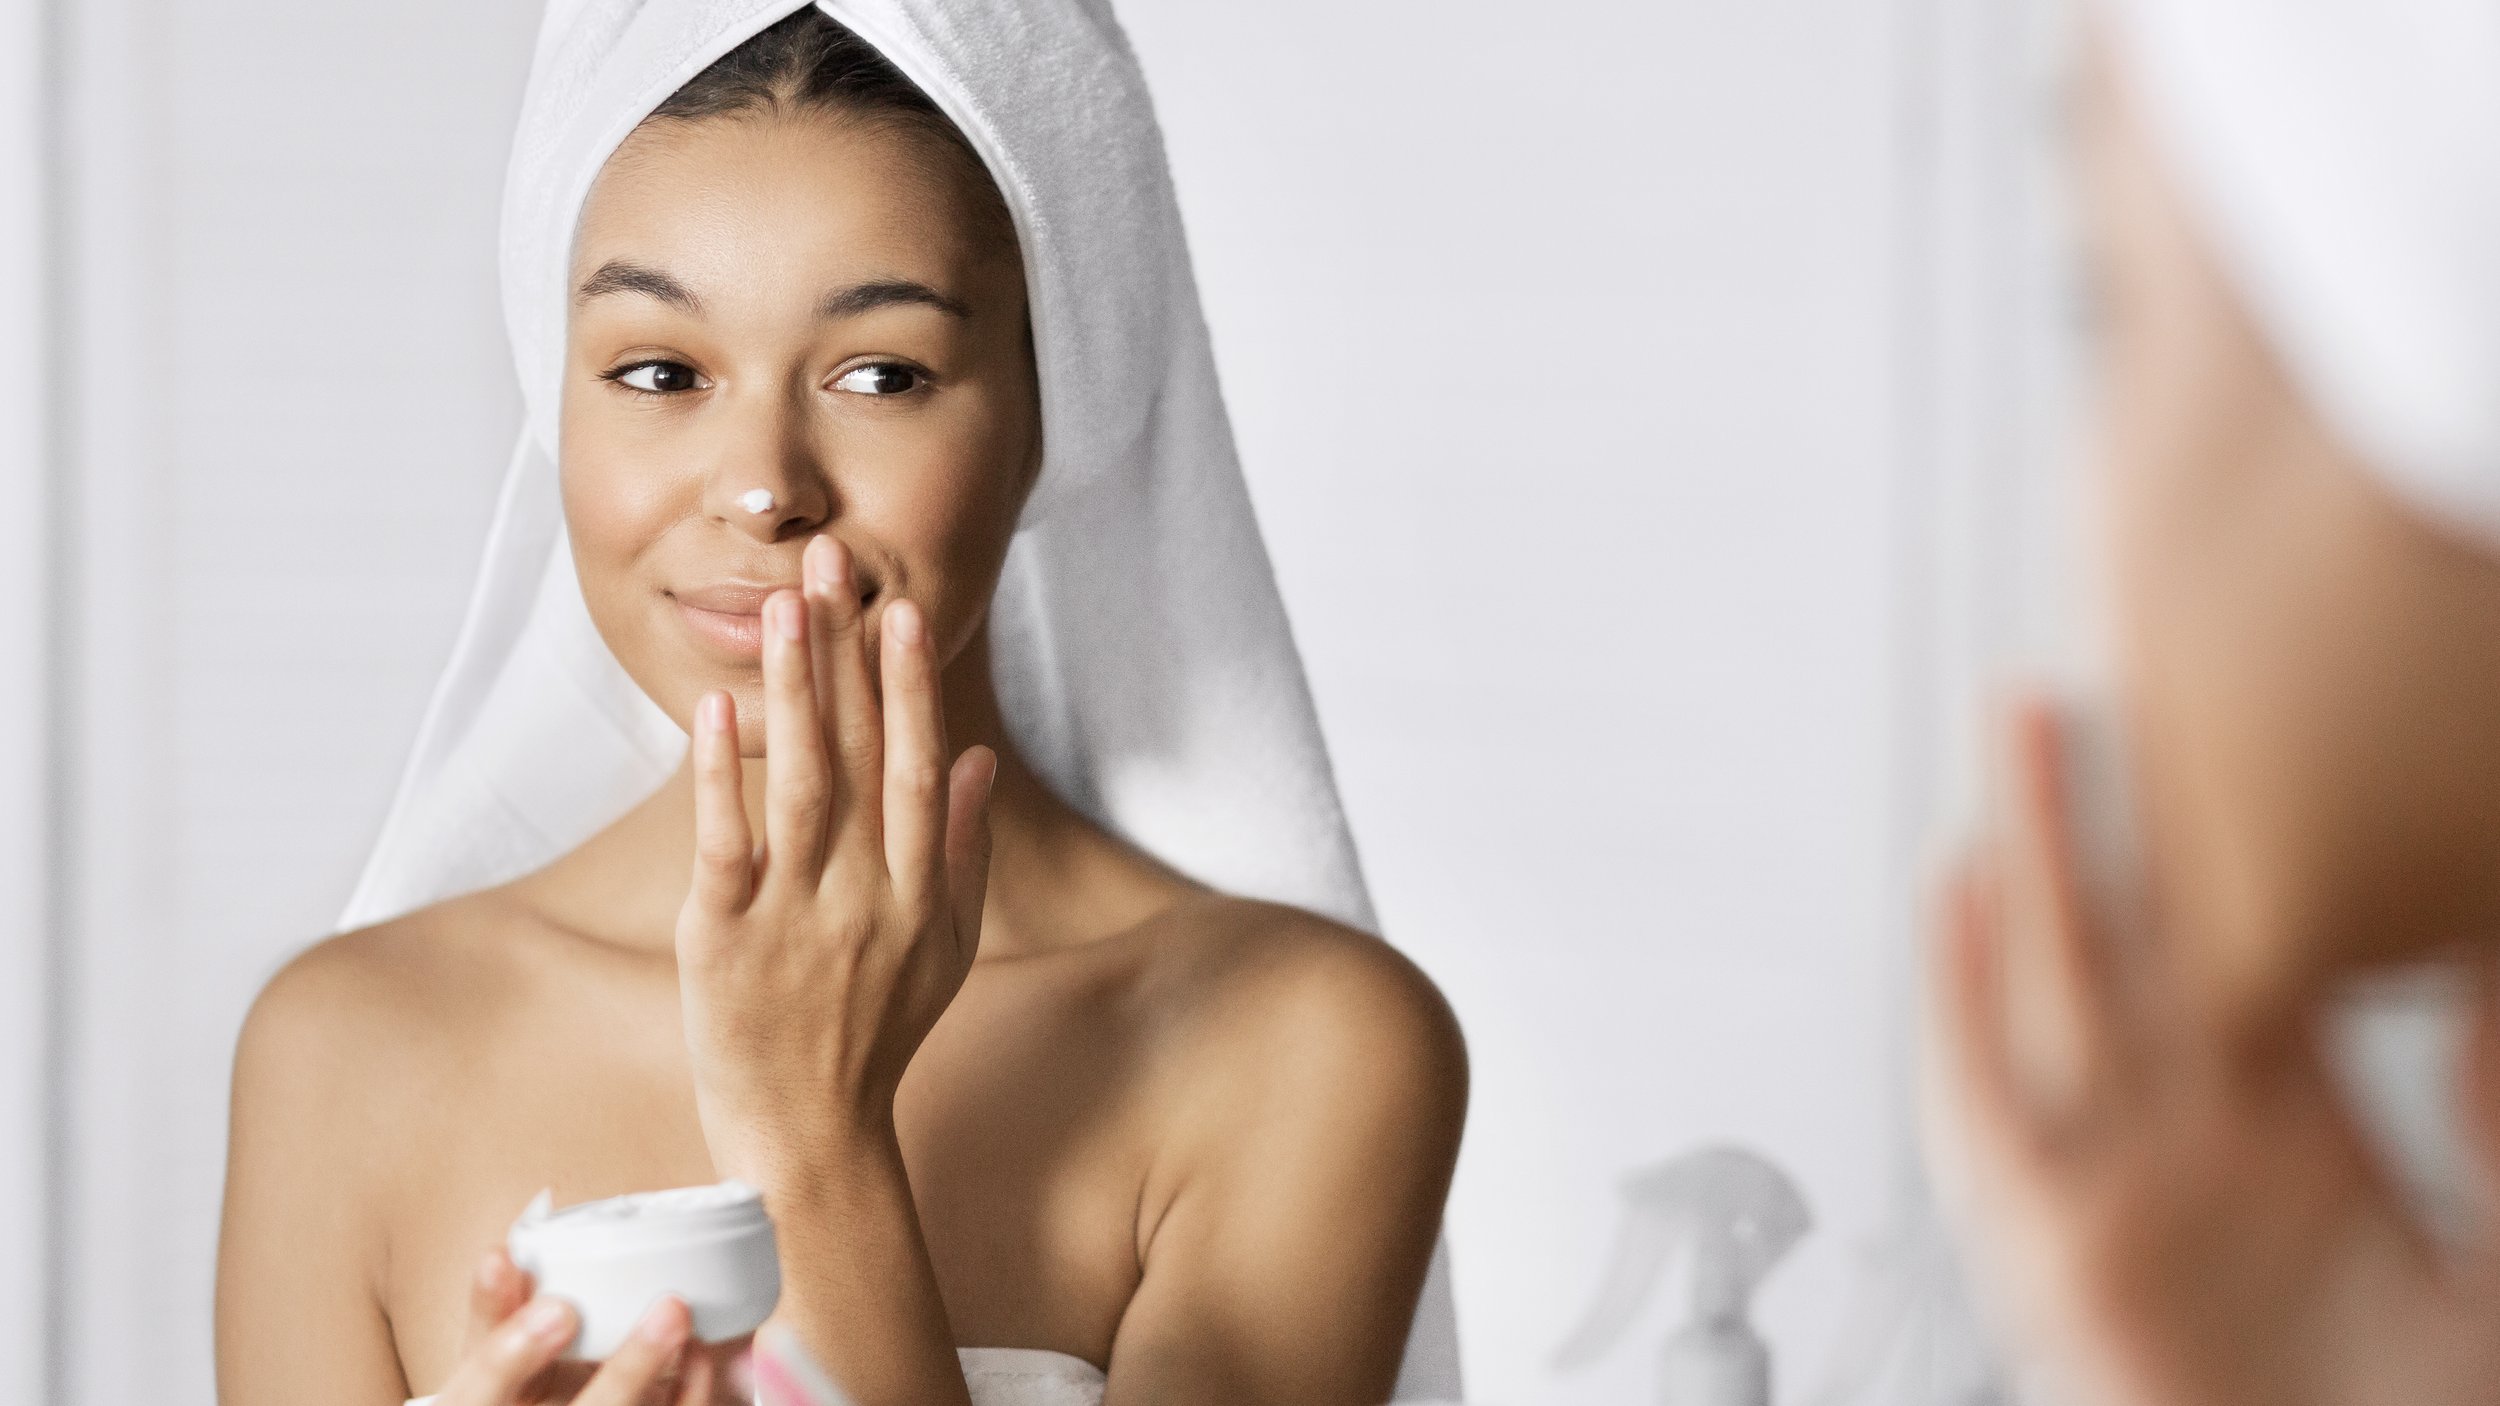 Woman dabbing lotion on her nose after a shower